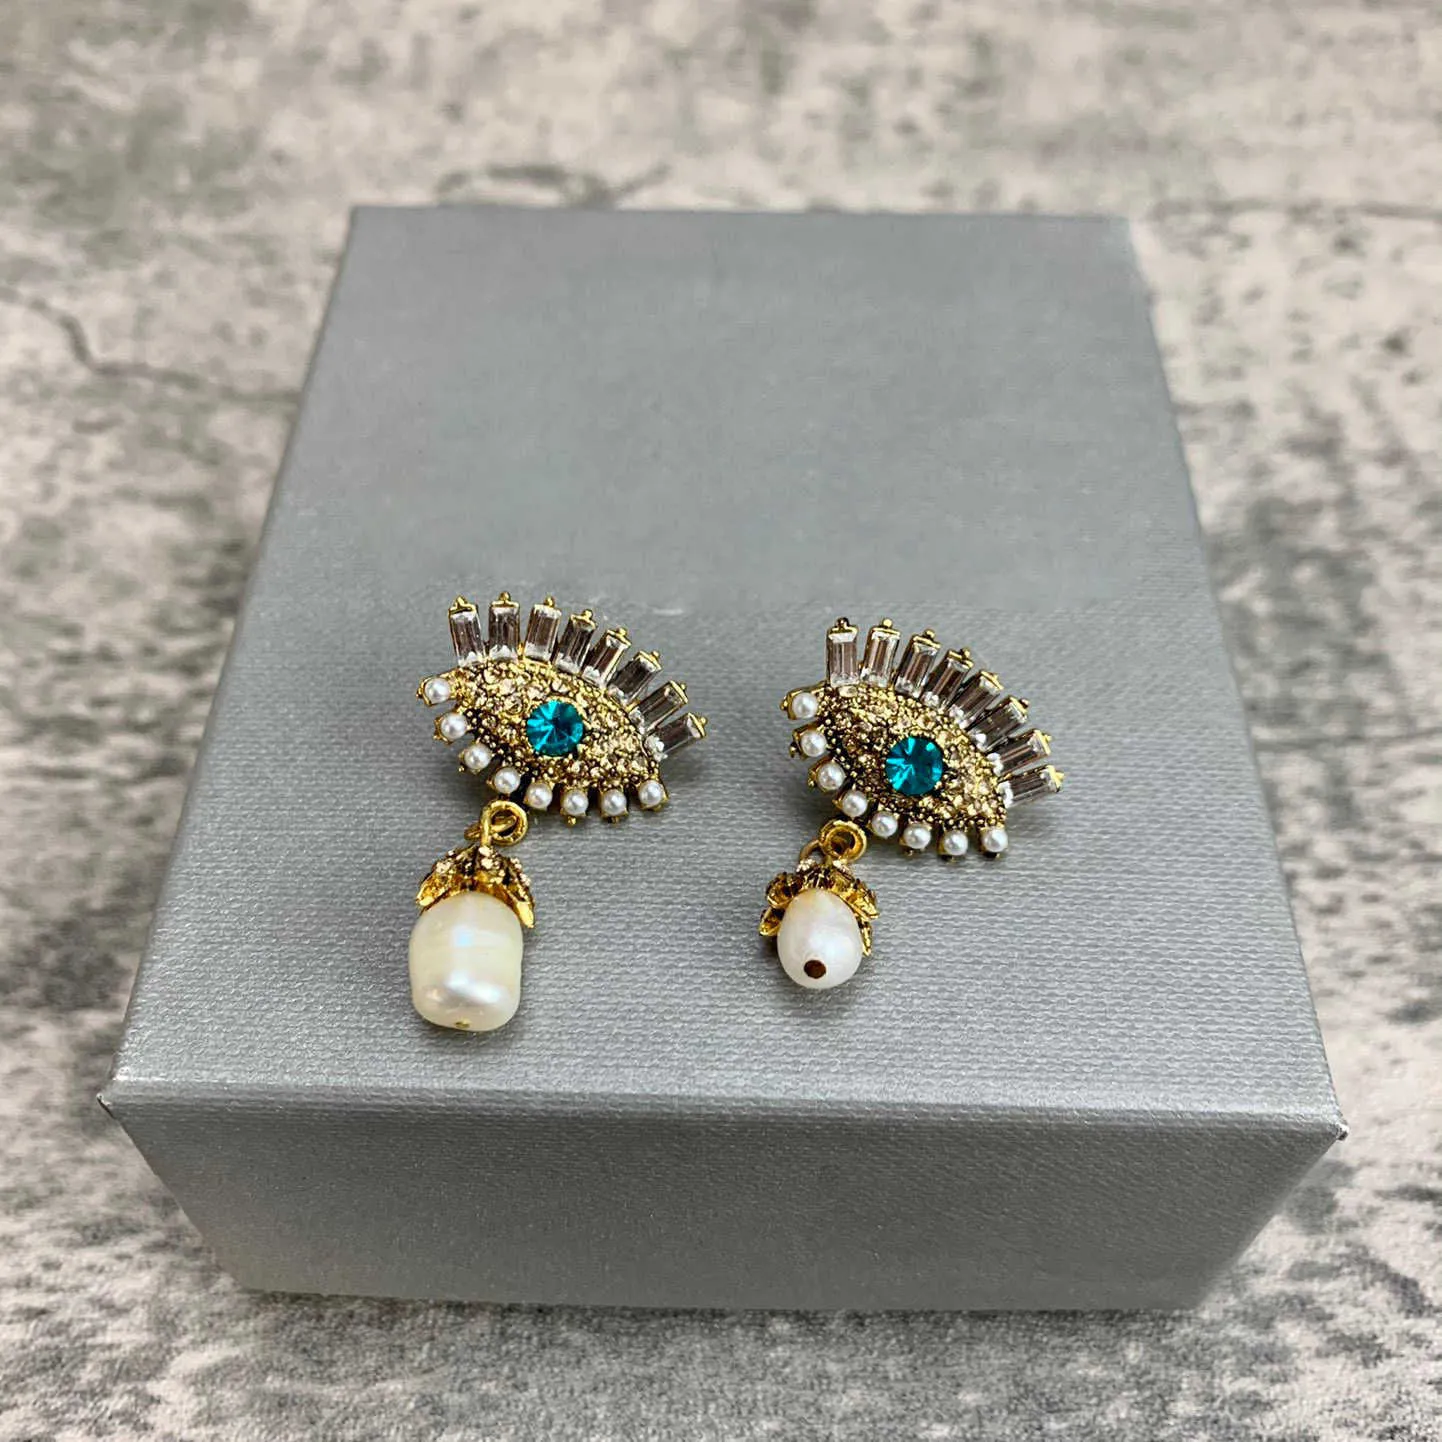 Brand Yellow Gold Color Fashion Jewelry Woman Pearls Earrings Evil Eyes Party High Quality Vintage Drop Pearls Stud Earrings6473982